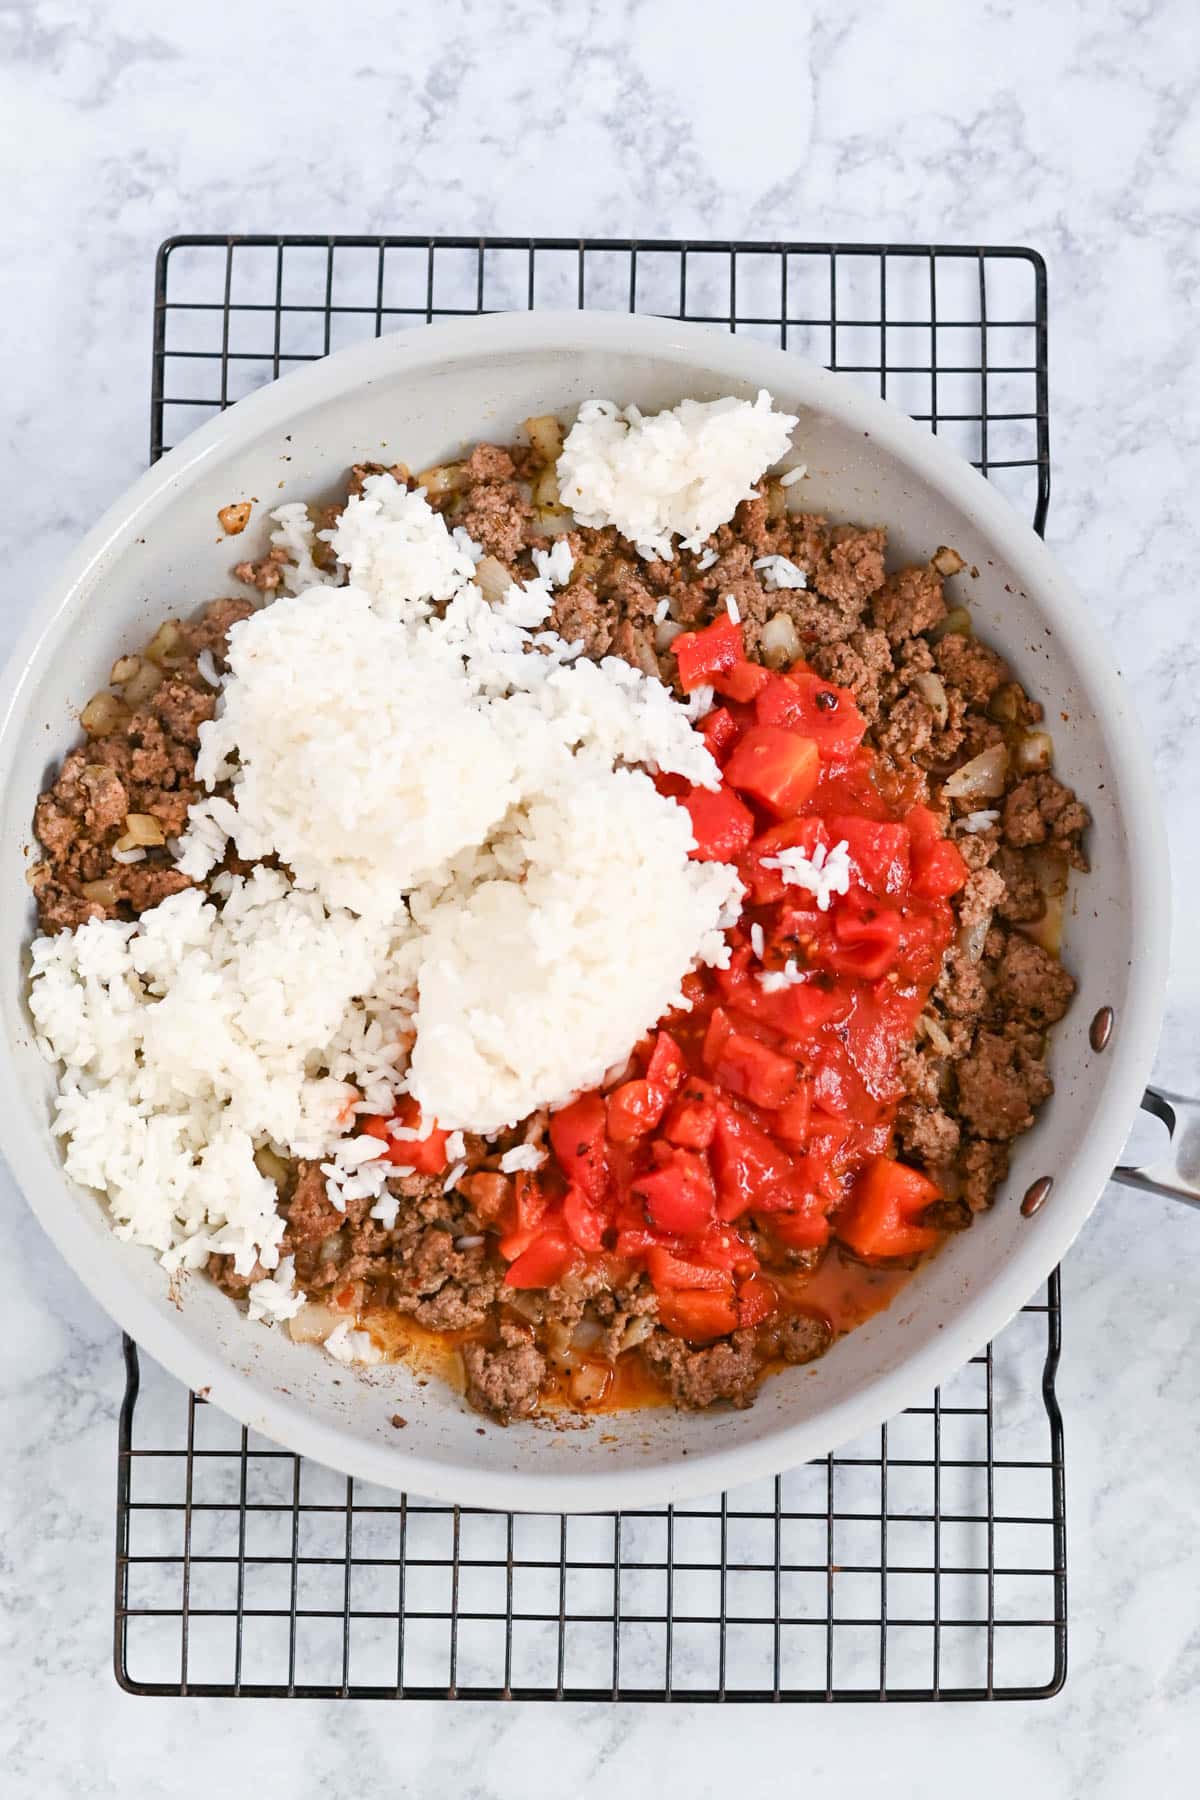 A skillet on a cooling rack contains ground meat, diced tomatoes, and a mound of rice.